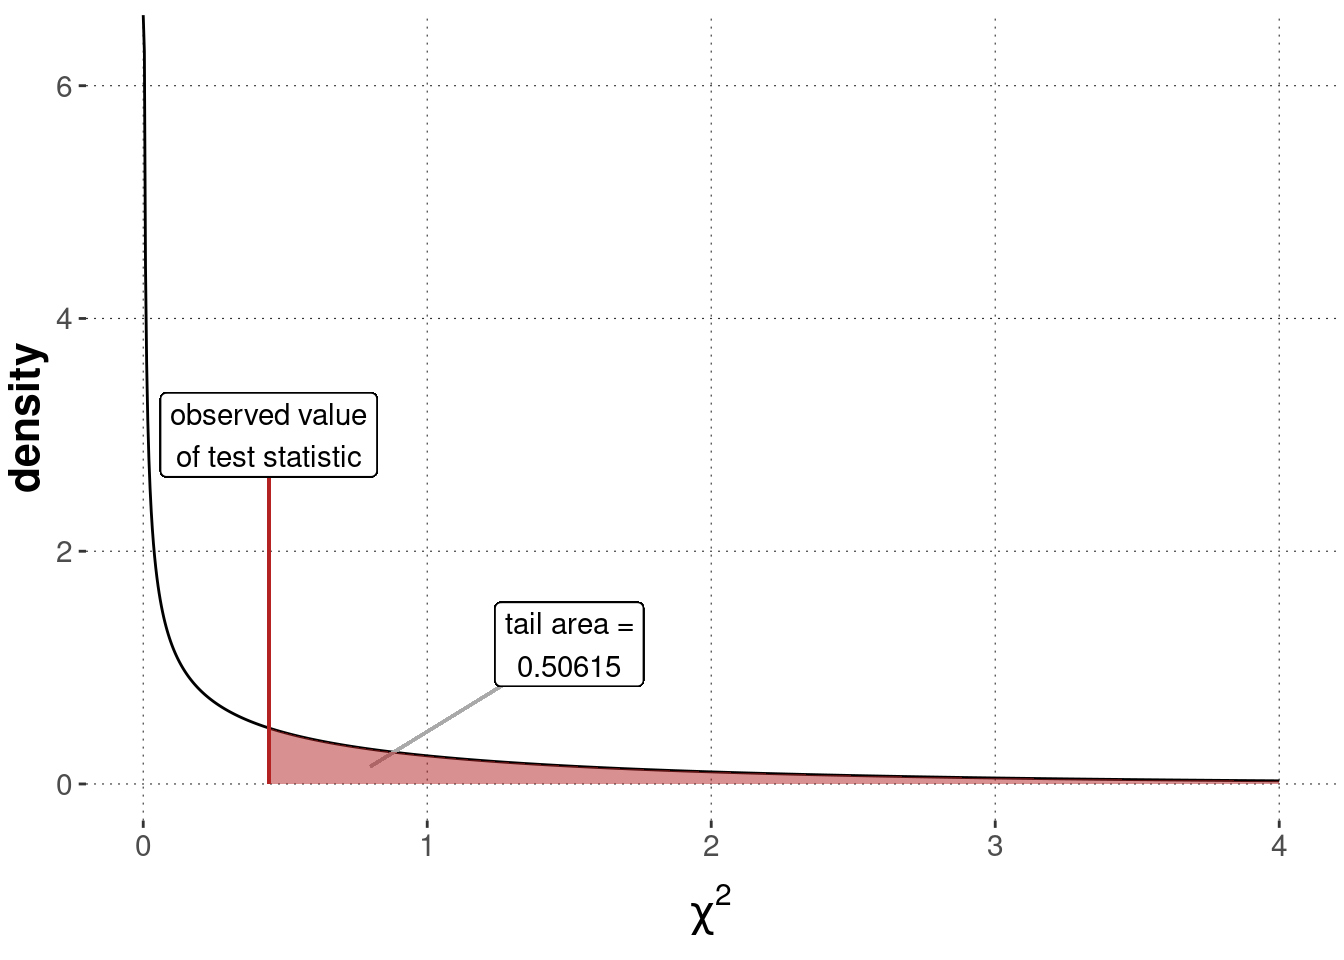 Sampling distribution for a Pearson's $\chi^2$ test of independence ($\chi^2$-distribution with $1$ degree of freedom), testing a flat baseline null hypothesis based on the BLJM data.